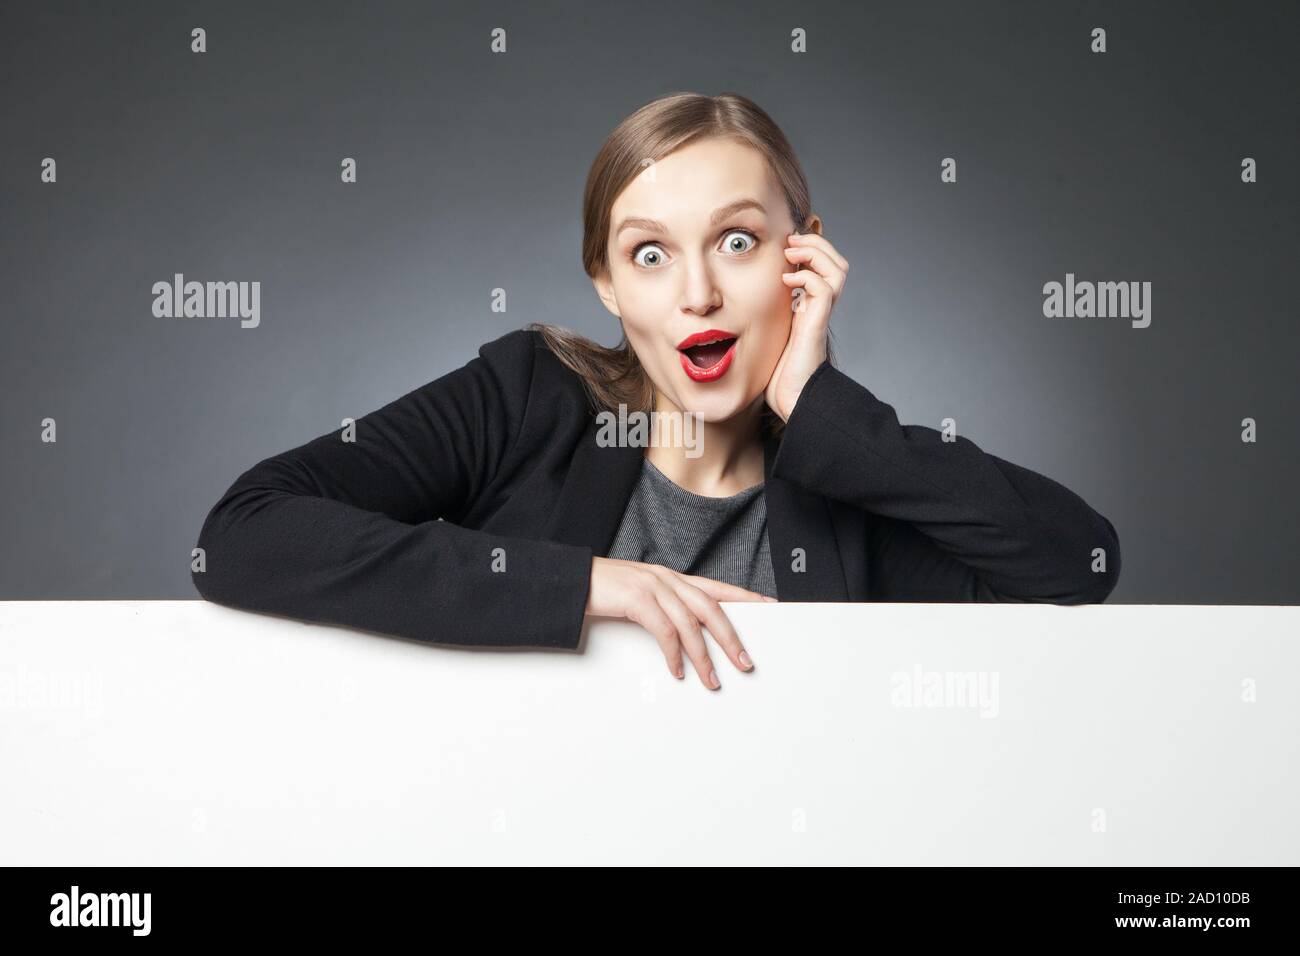 Wide-eyed woman with red lips looking at camera Stock Photo